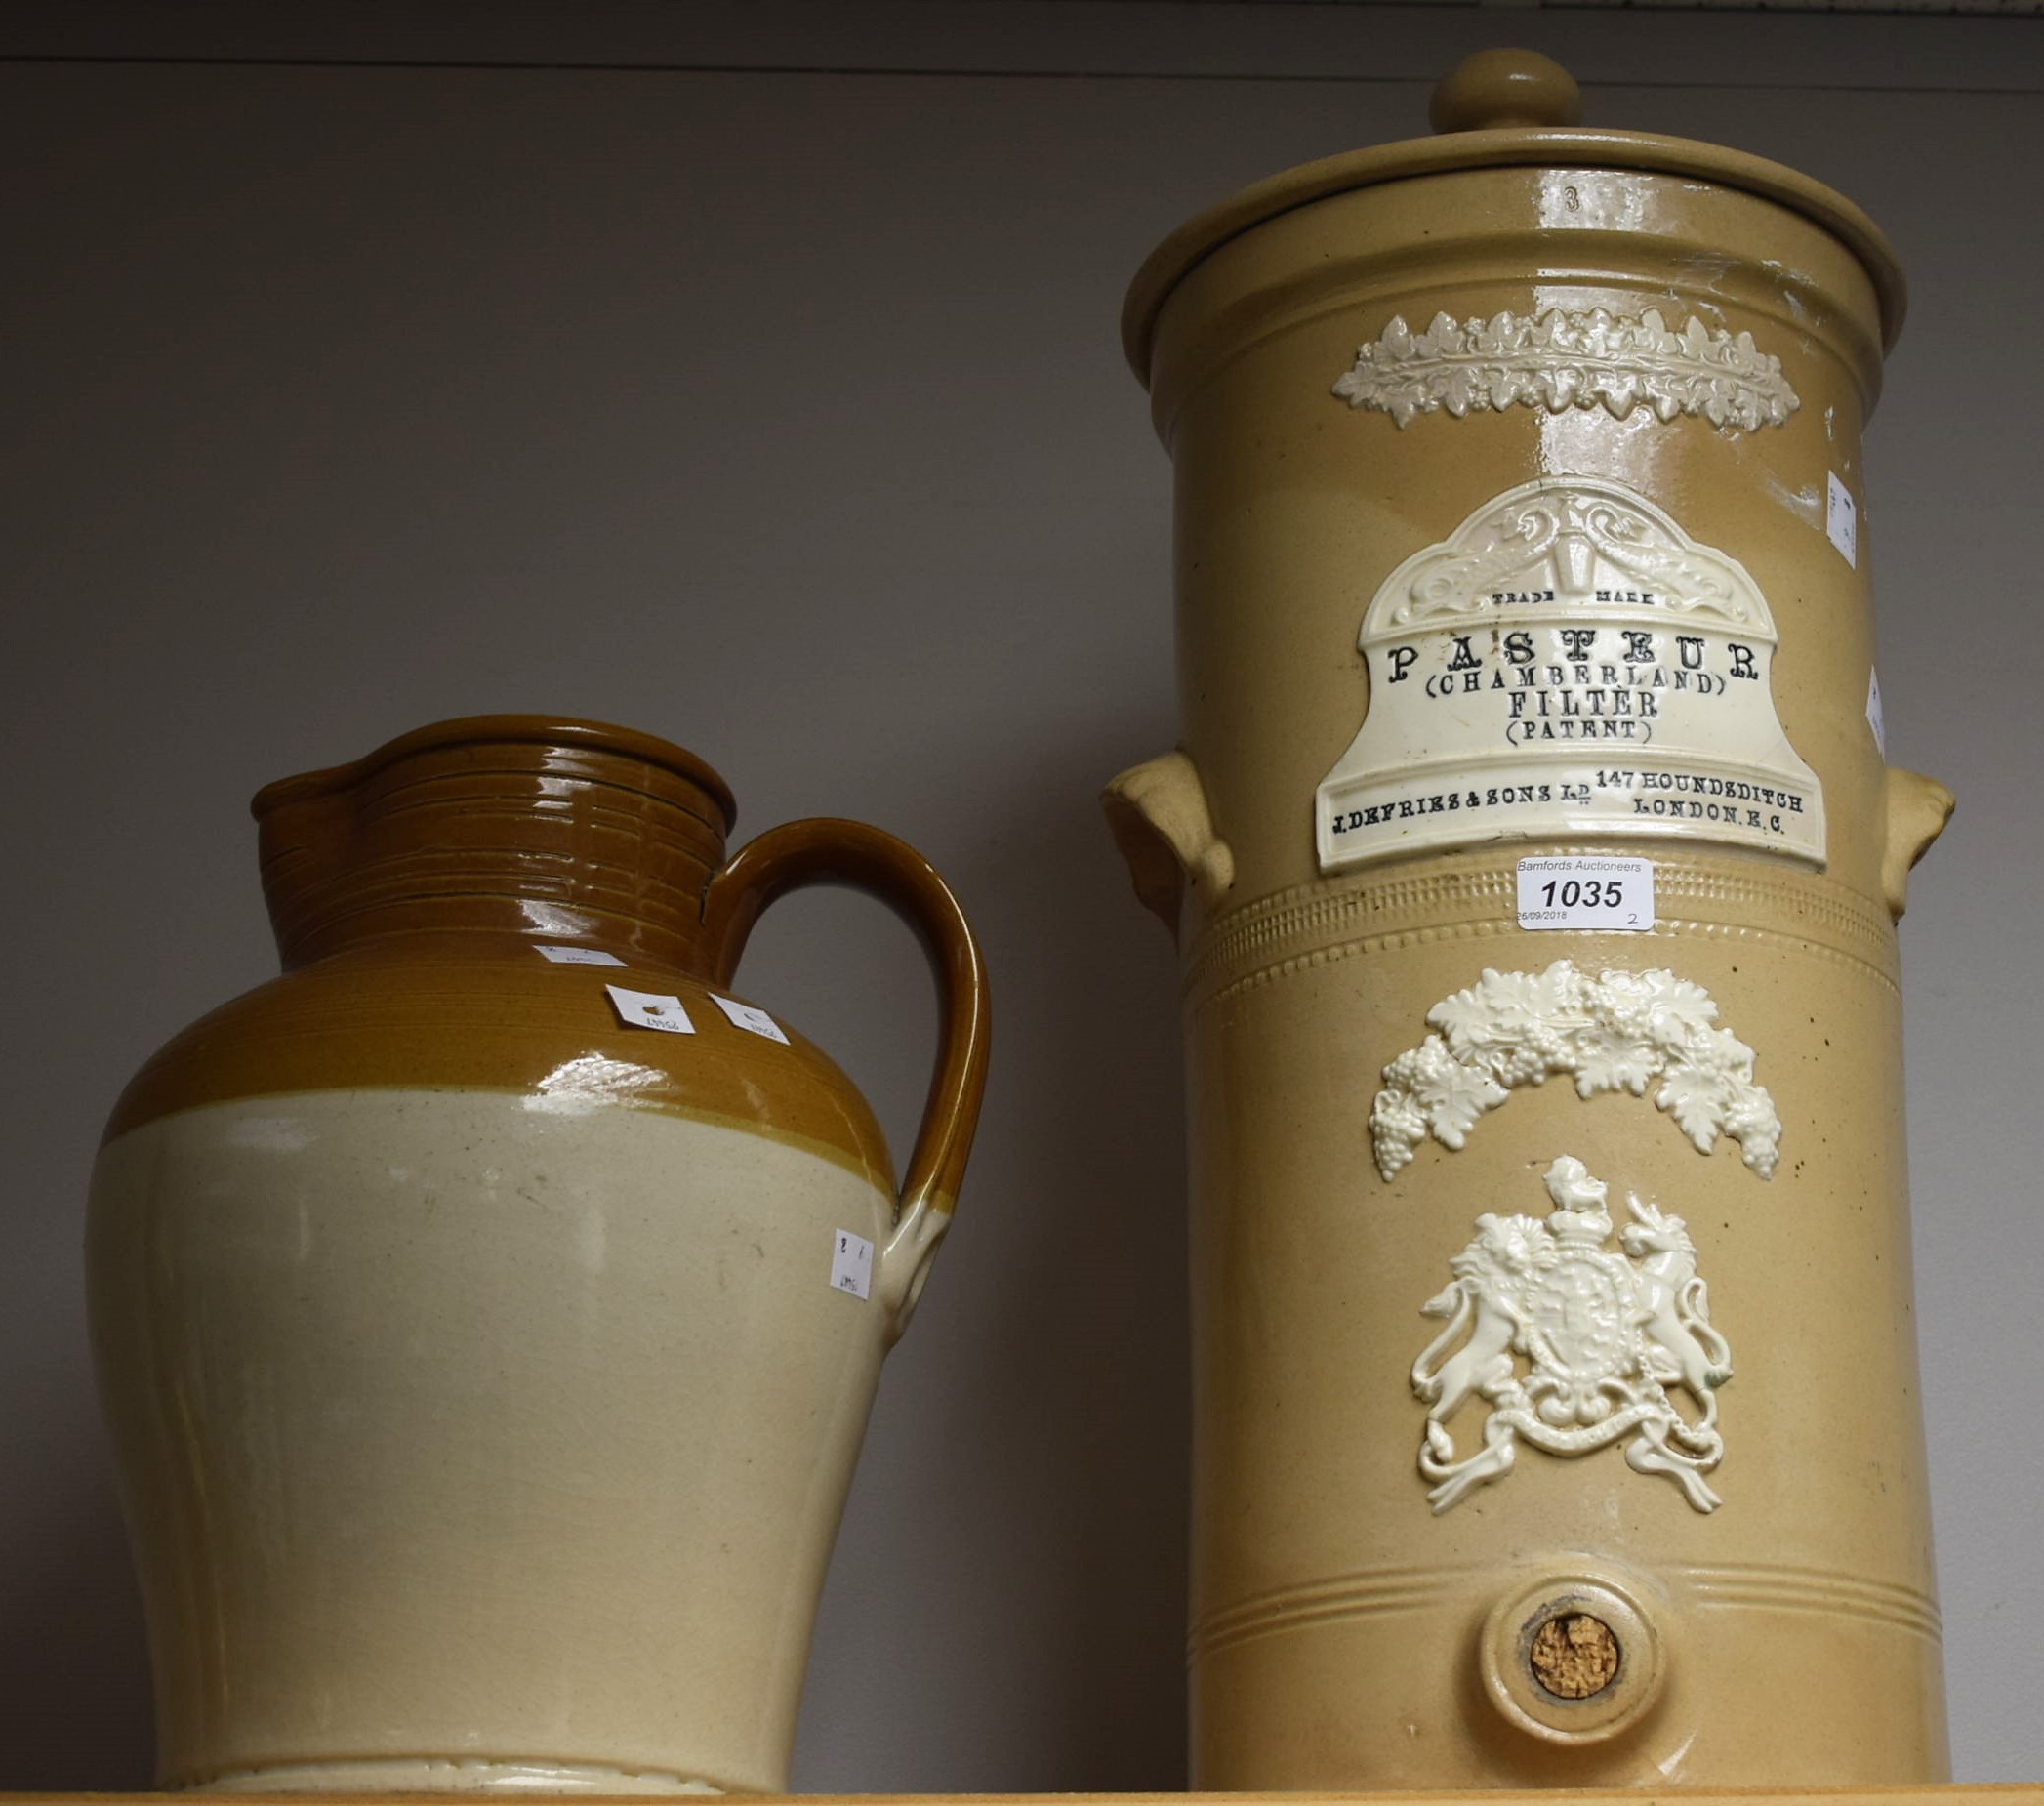 A Victorian stoneware water filter, inscribed 'Pasteur (Chamberland) Filter (Patent), J. D.